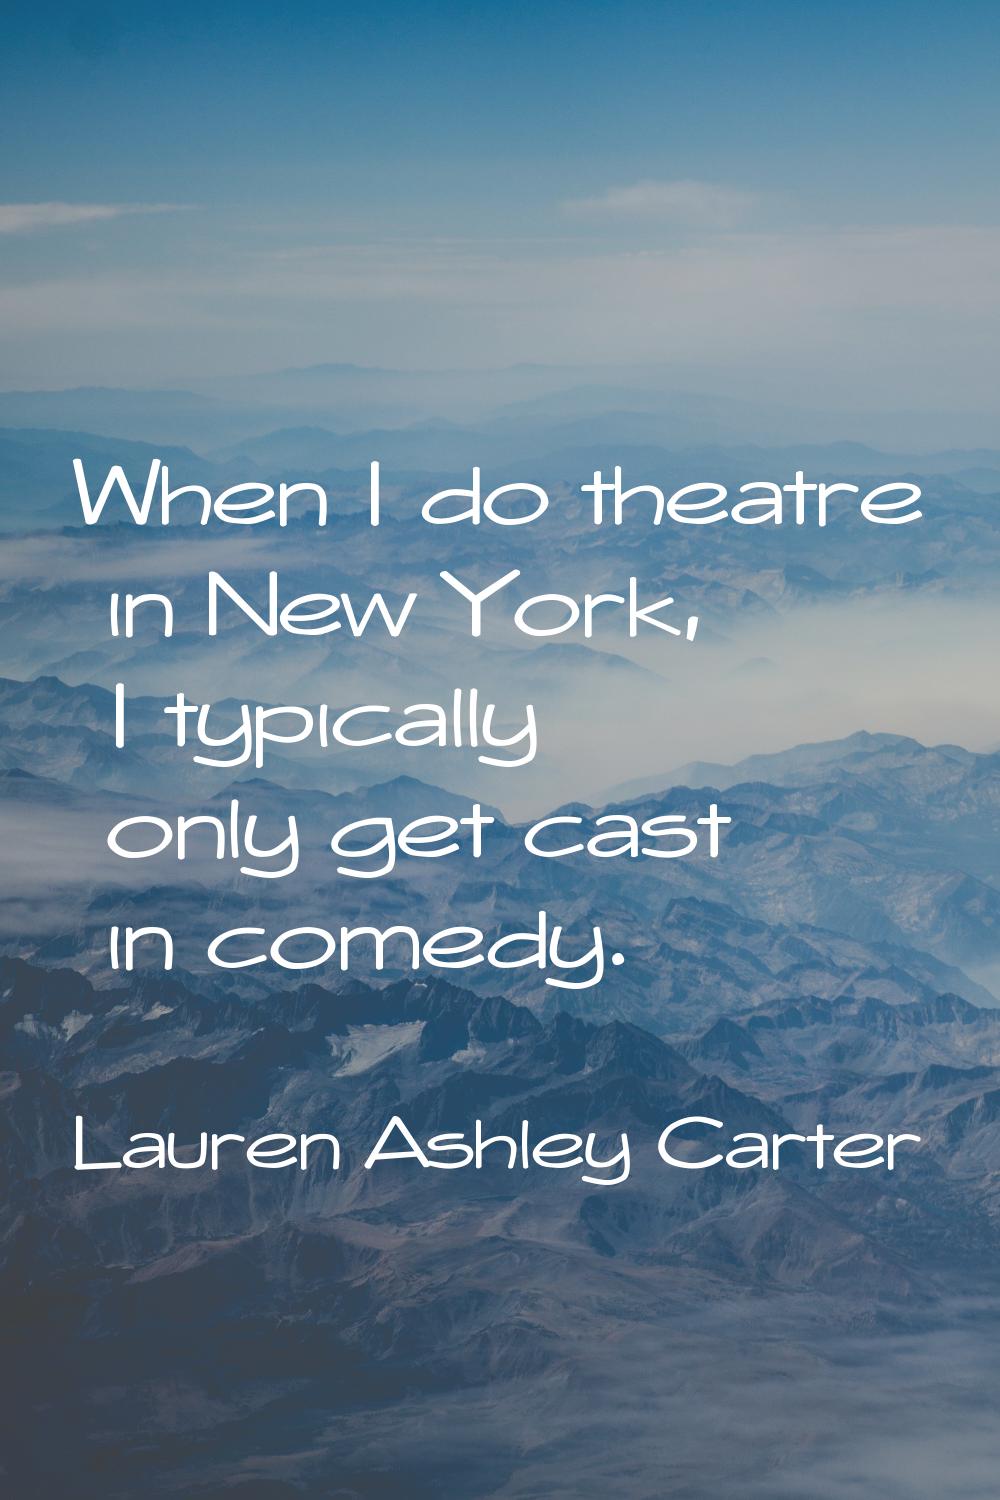 When I do theatre in New York, I typically only get cast in comedy.